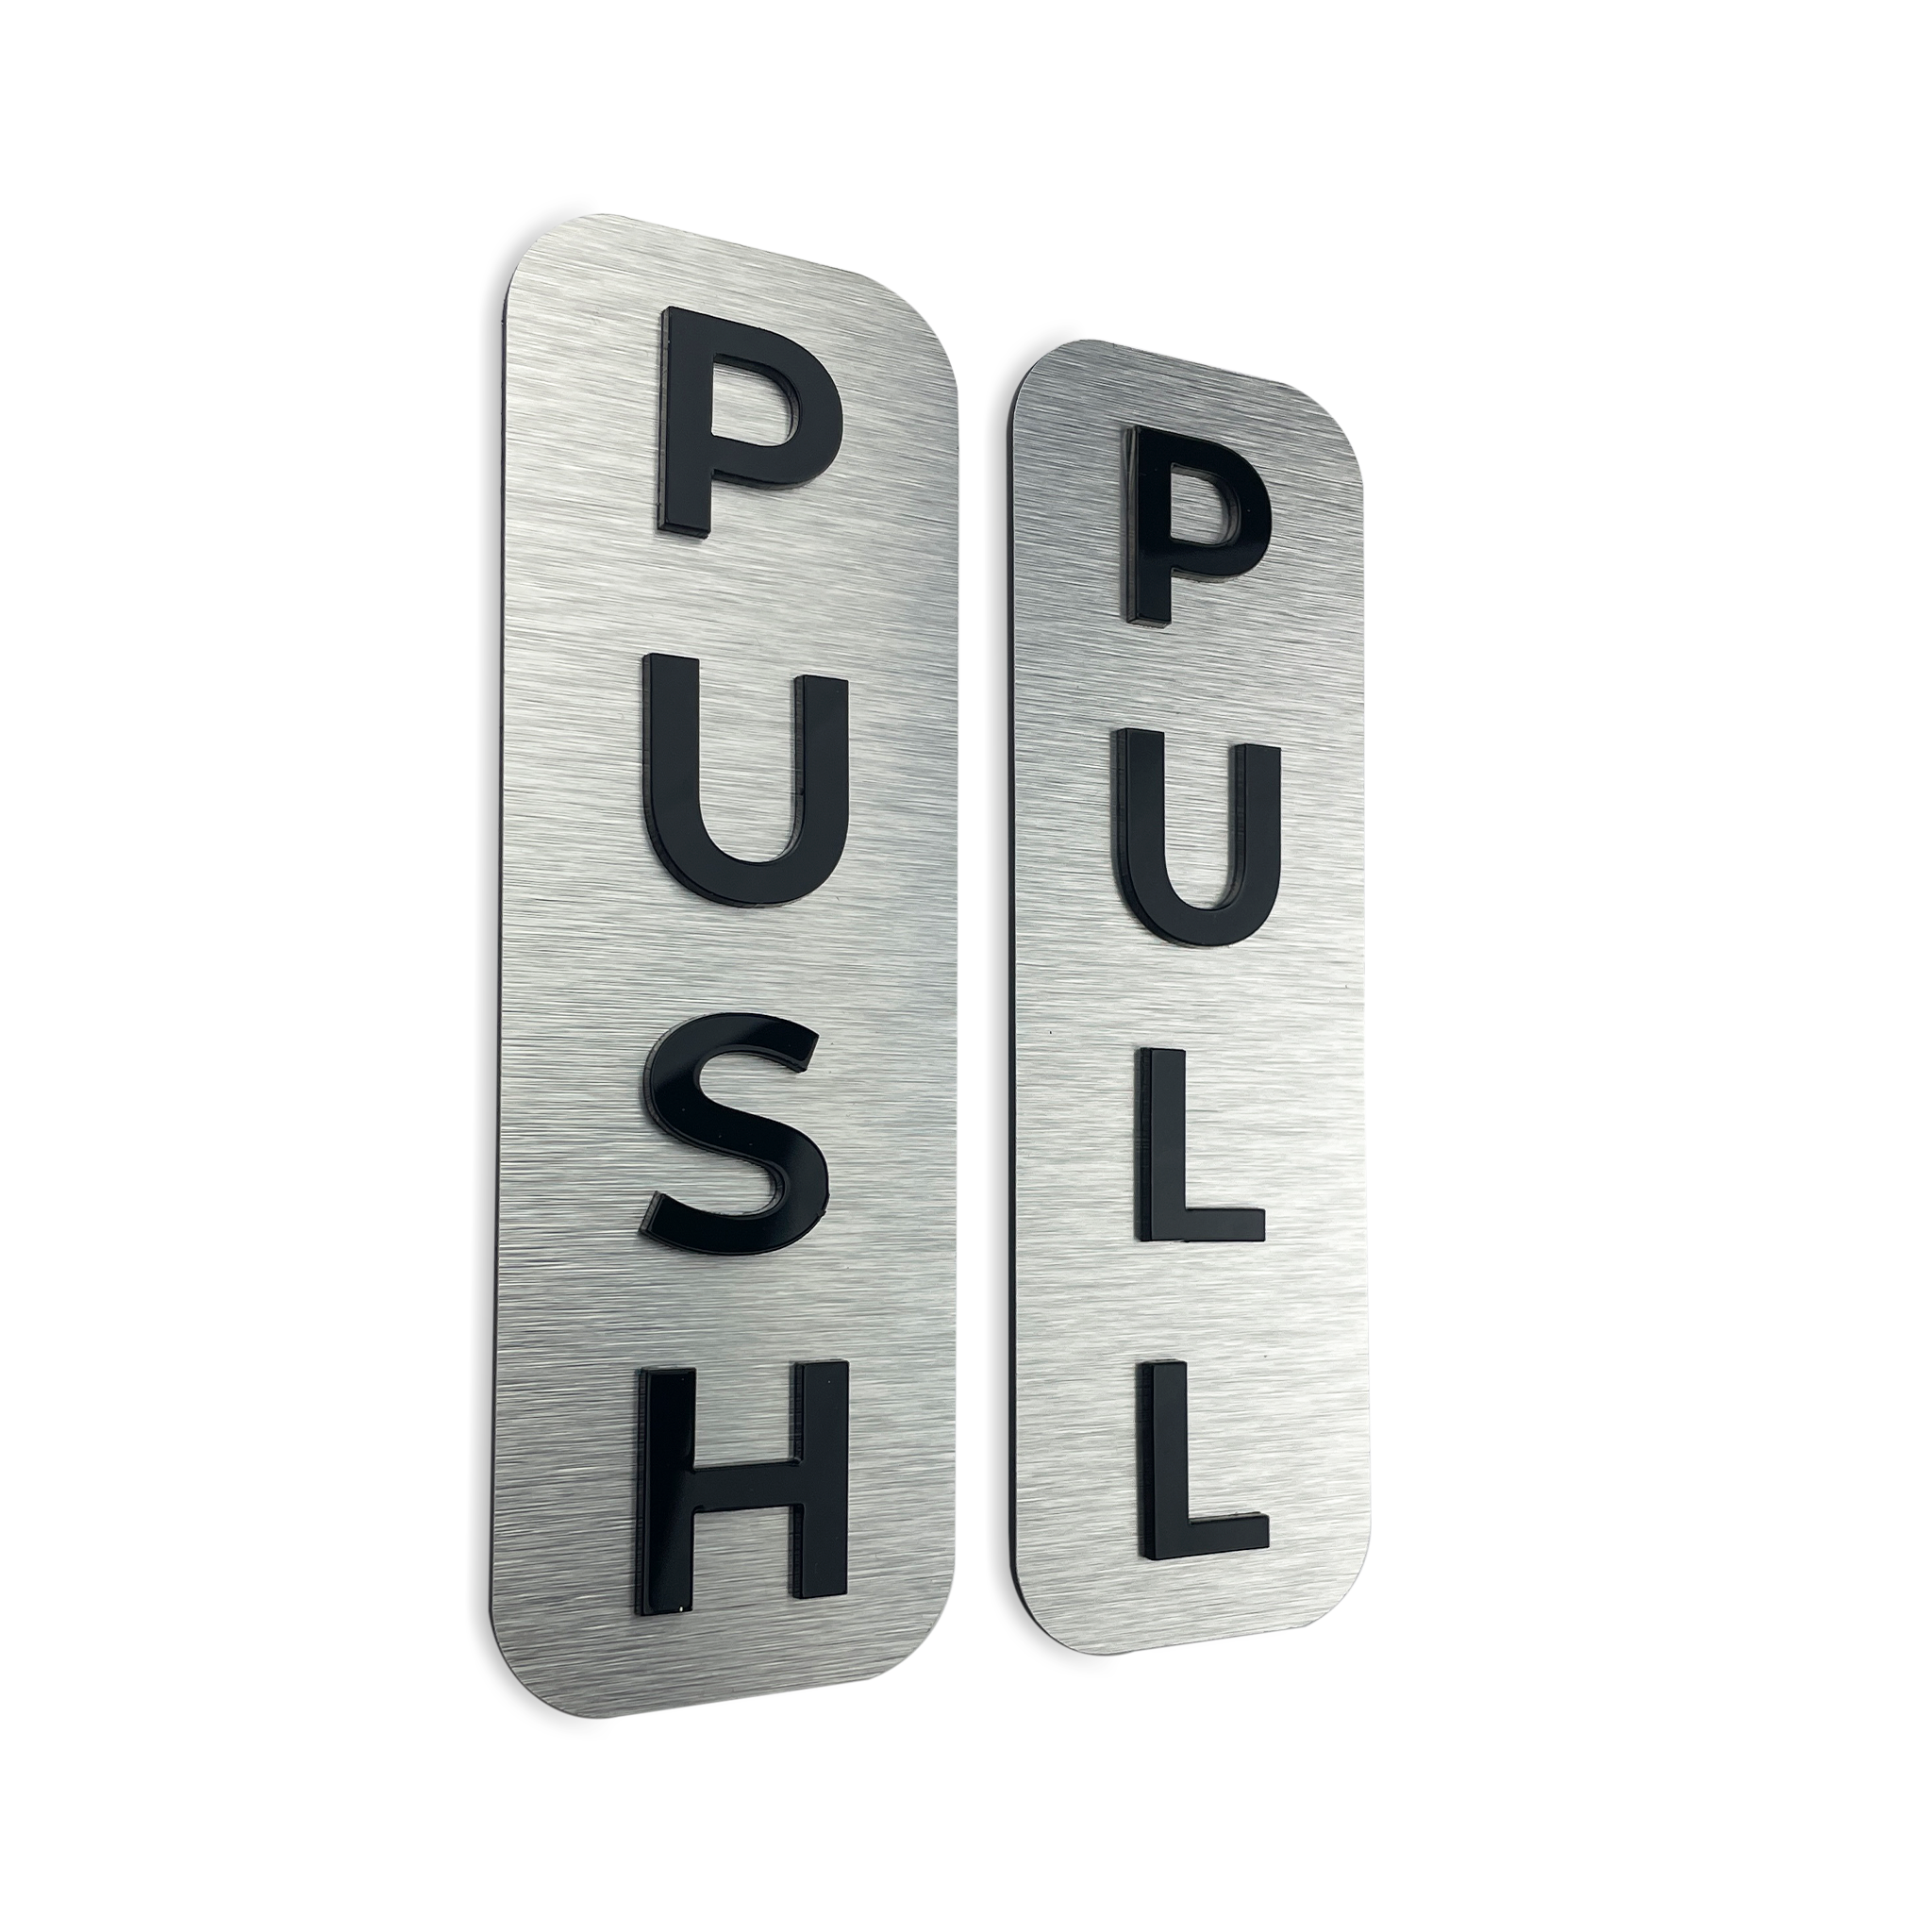 PUSH AND PULL SIGNAGE - ALUMA Door Signs - Custom Door Signs For Business & Office